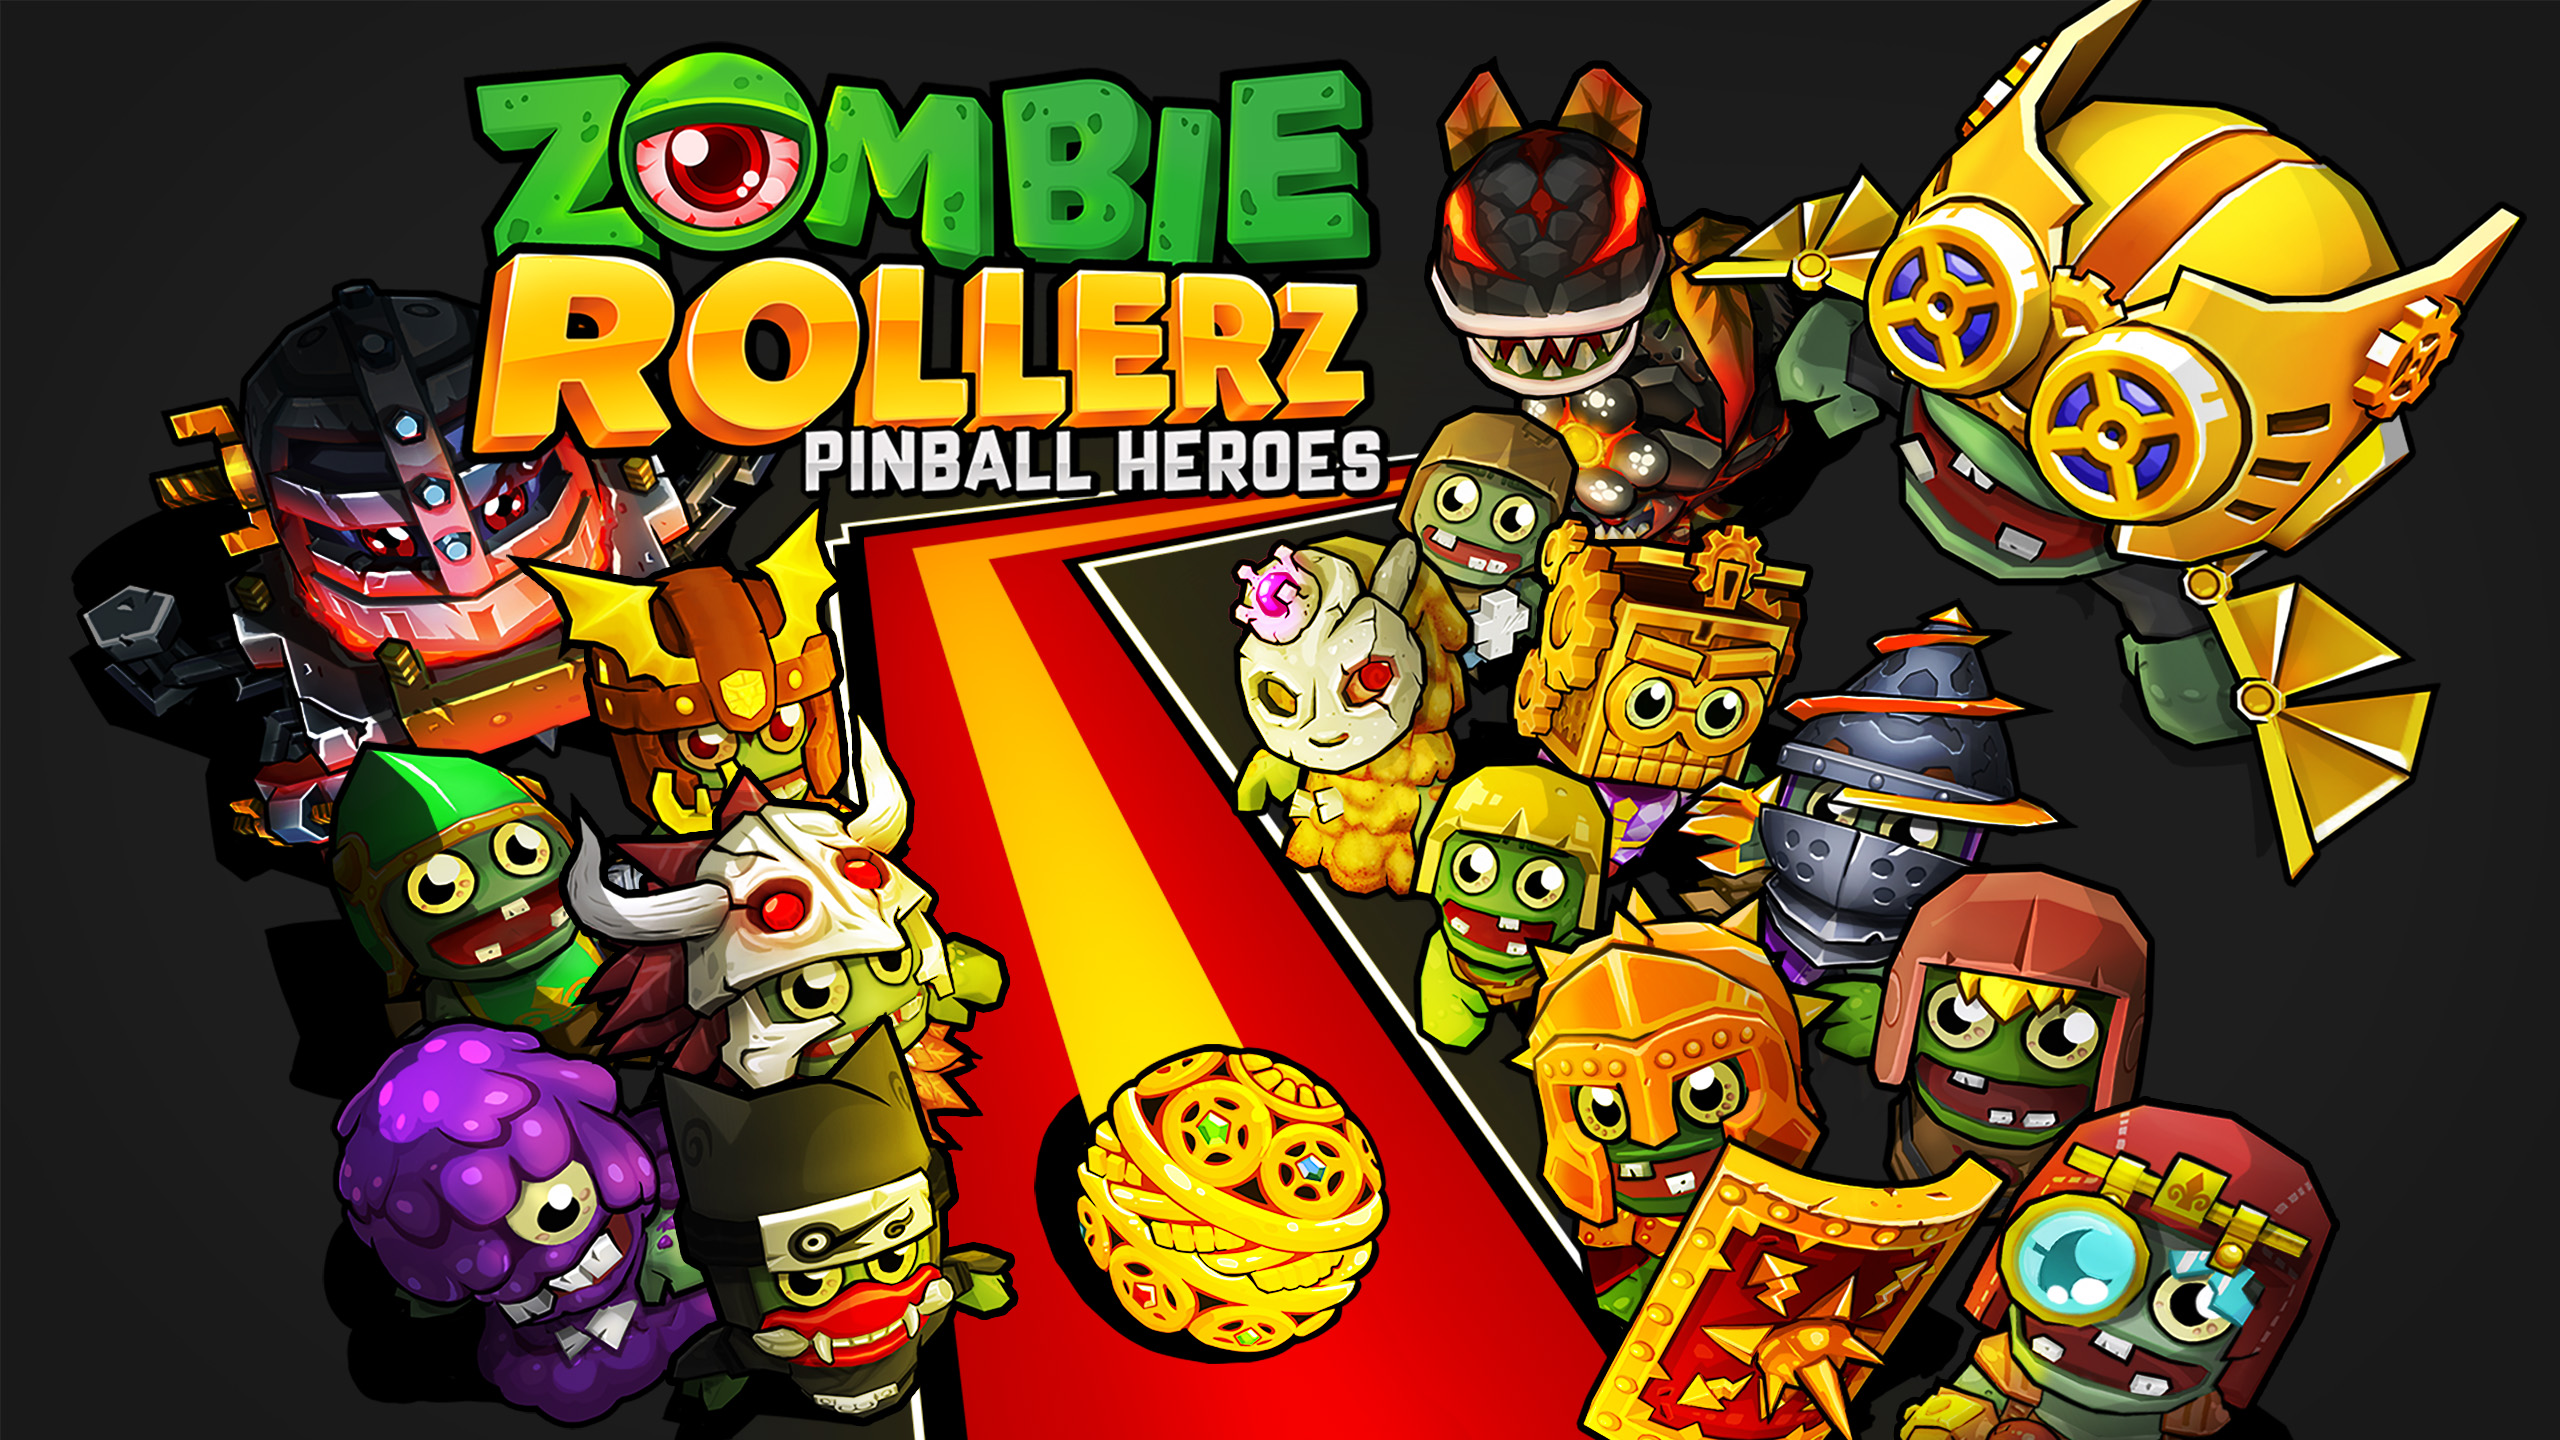 Video Game Zombie Rollerz: Pinball Heroes HD Wallpaper | Background Image